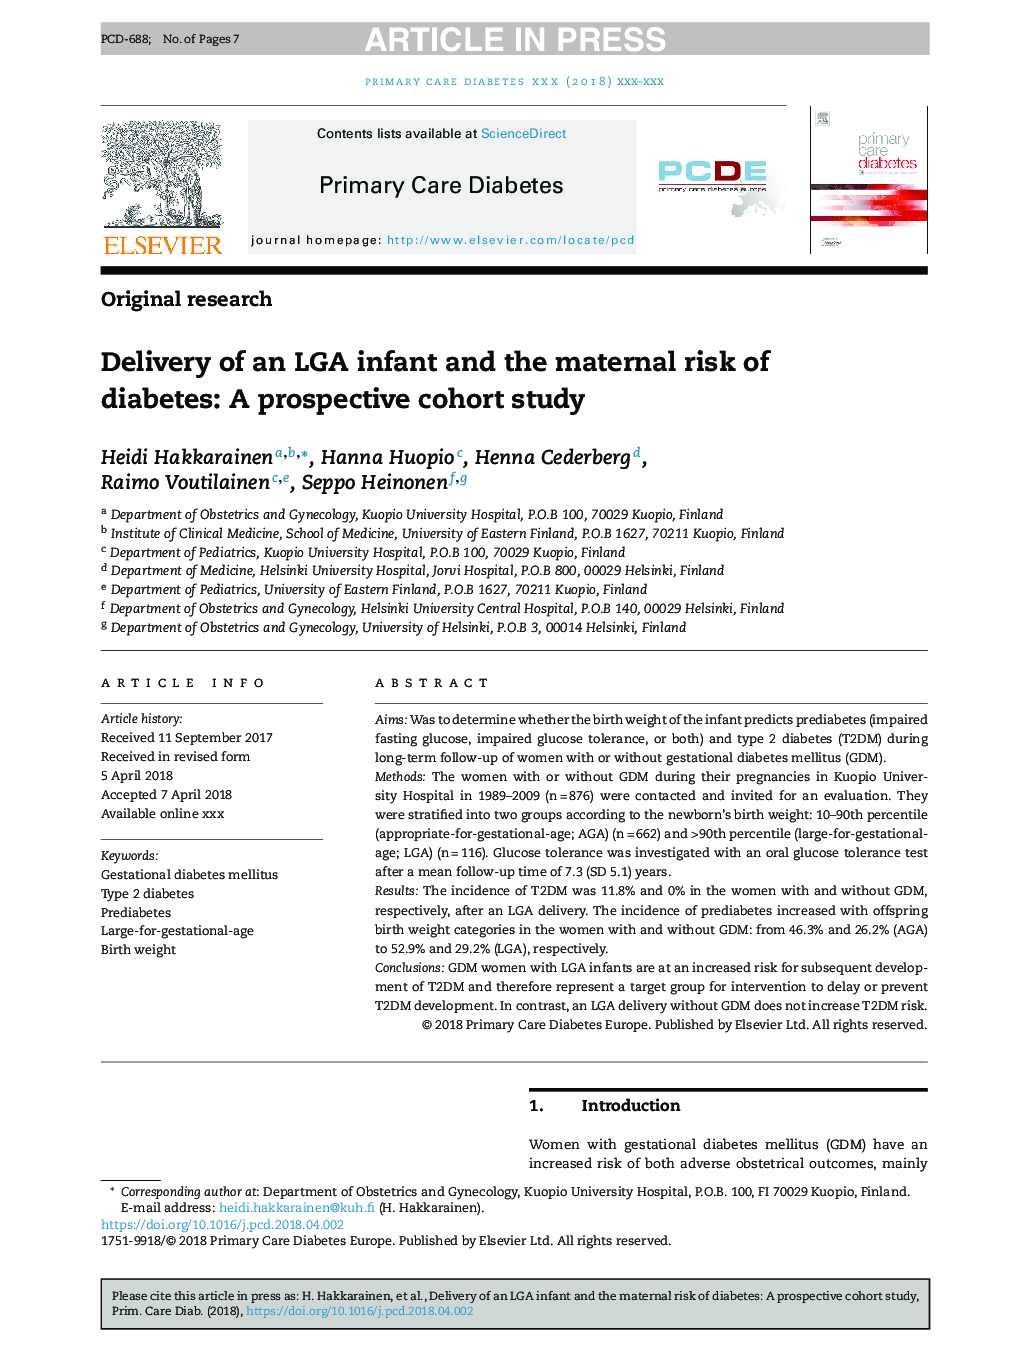 Delivery of an LGA infant and the maternal risk of diabetes: A prospective cohort study